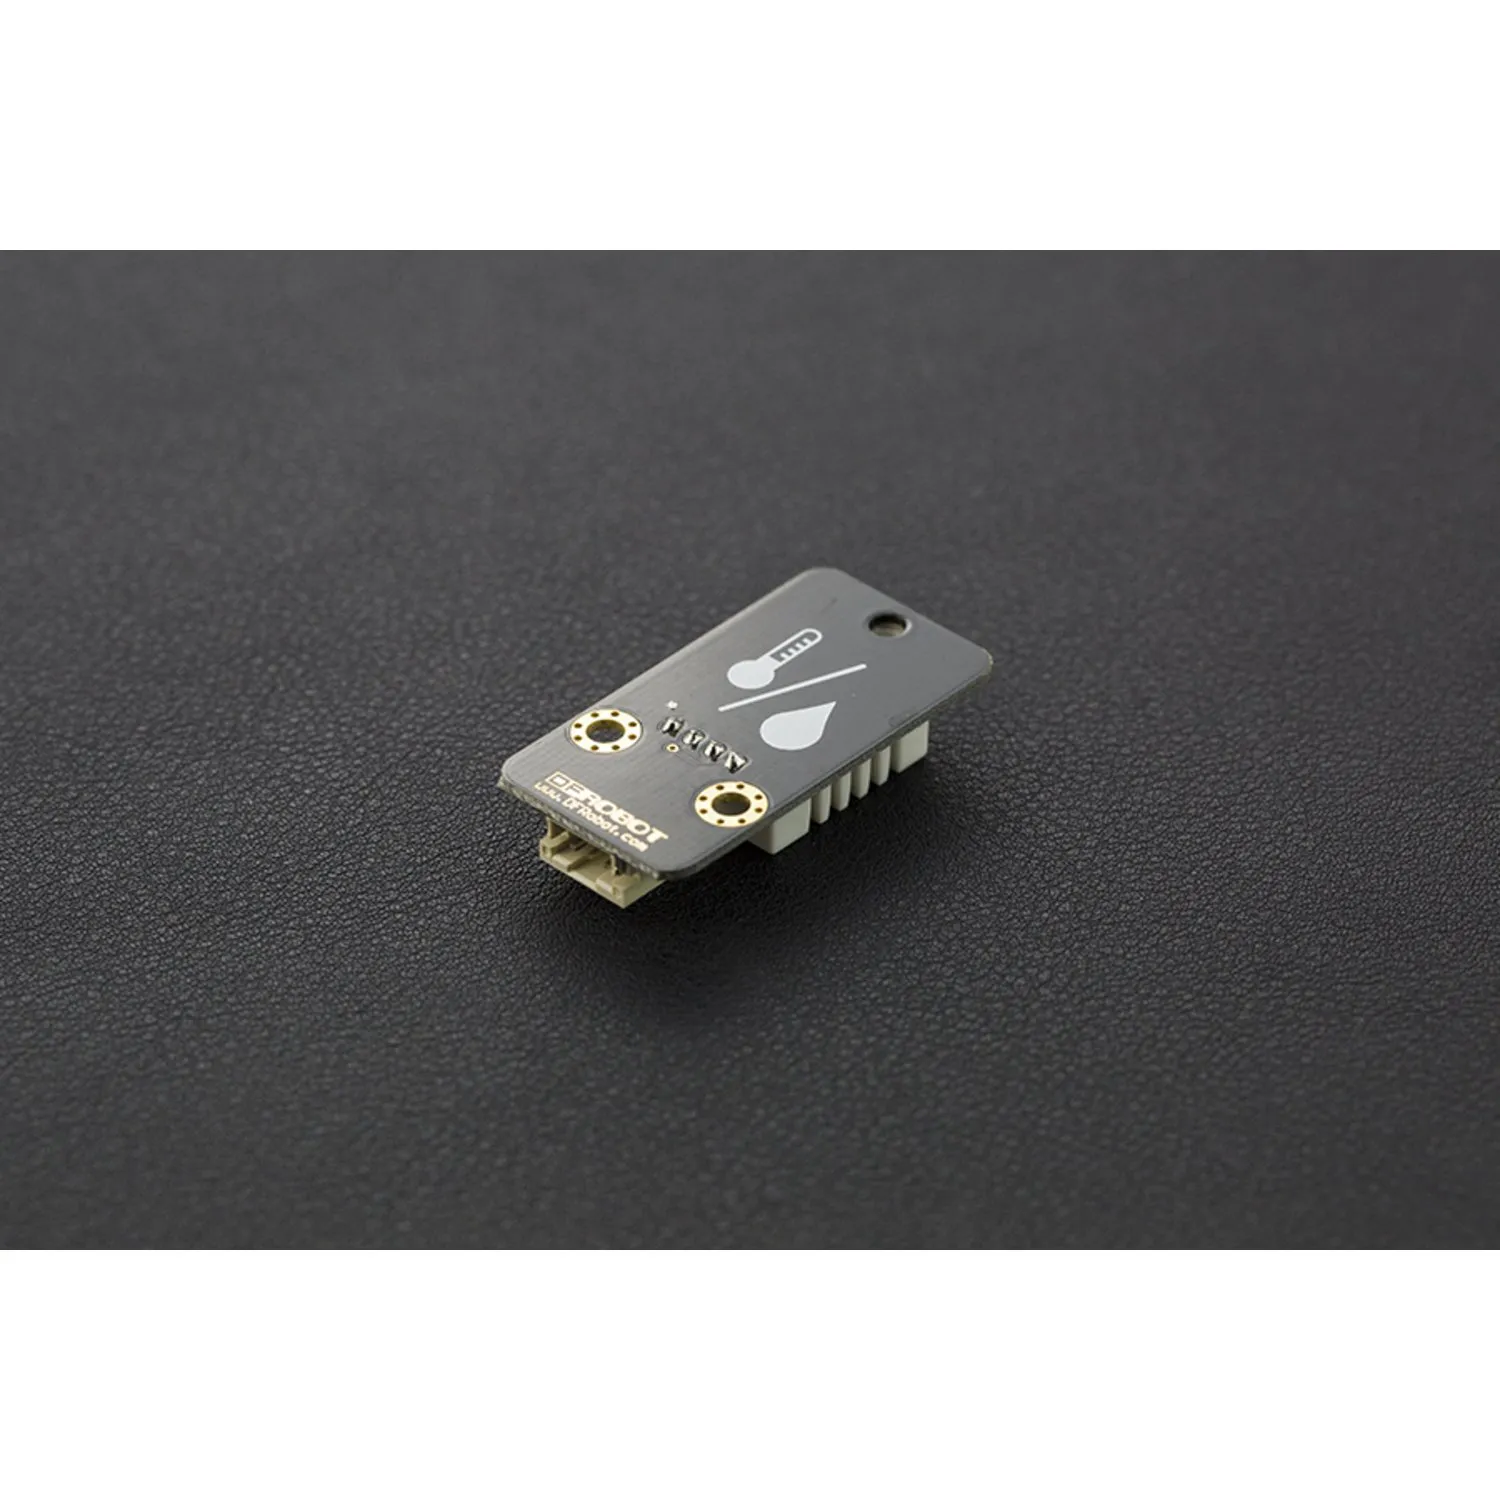 Photo of DHT22 Temperature and Humidity Sensor